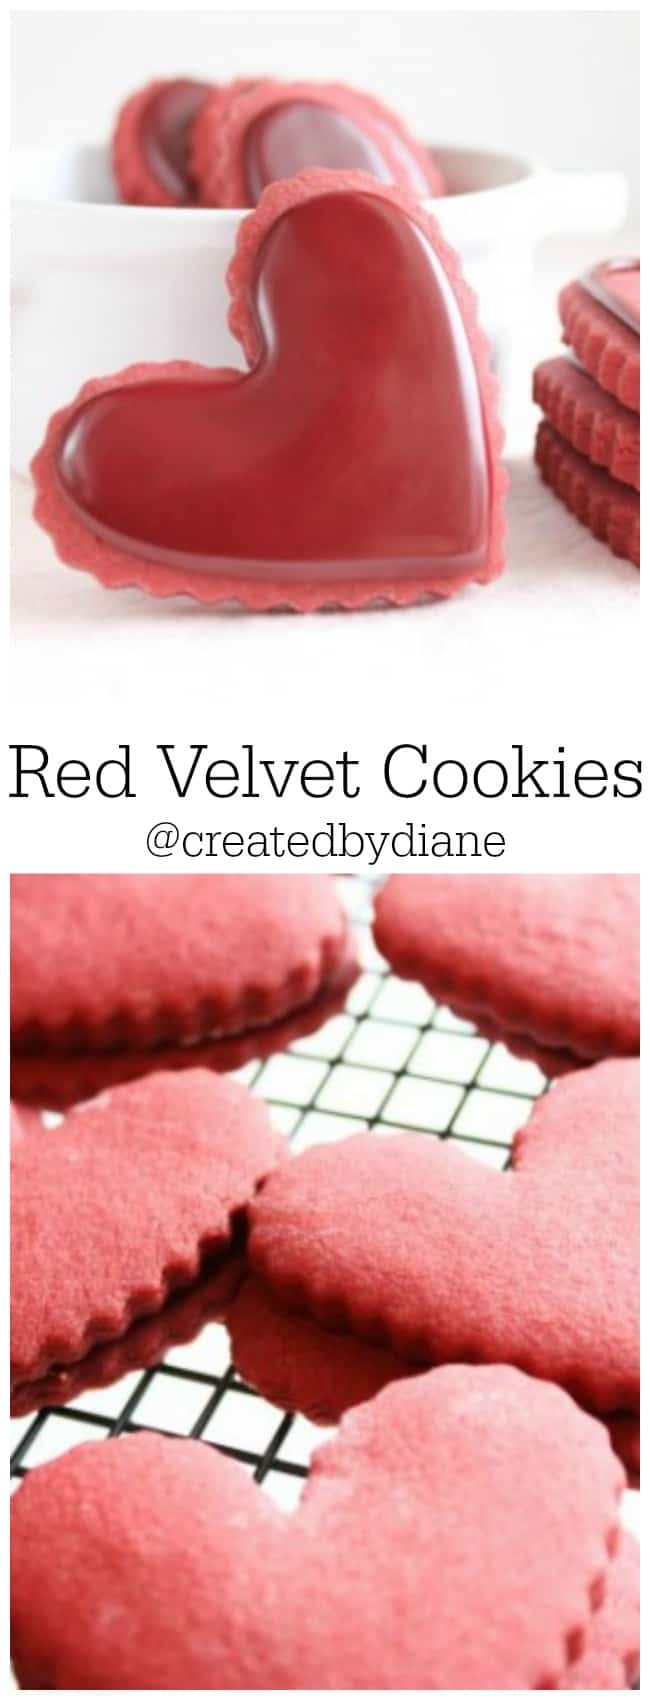 Red Velvet Cut Out Cookies with Red Velvet Icing @createdbydiane